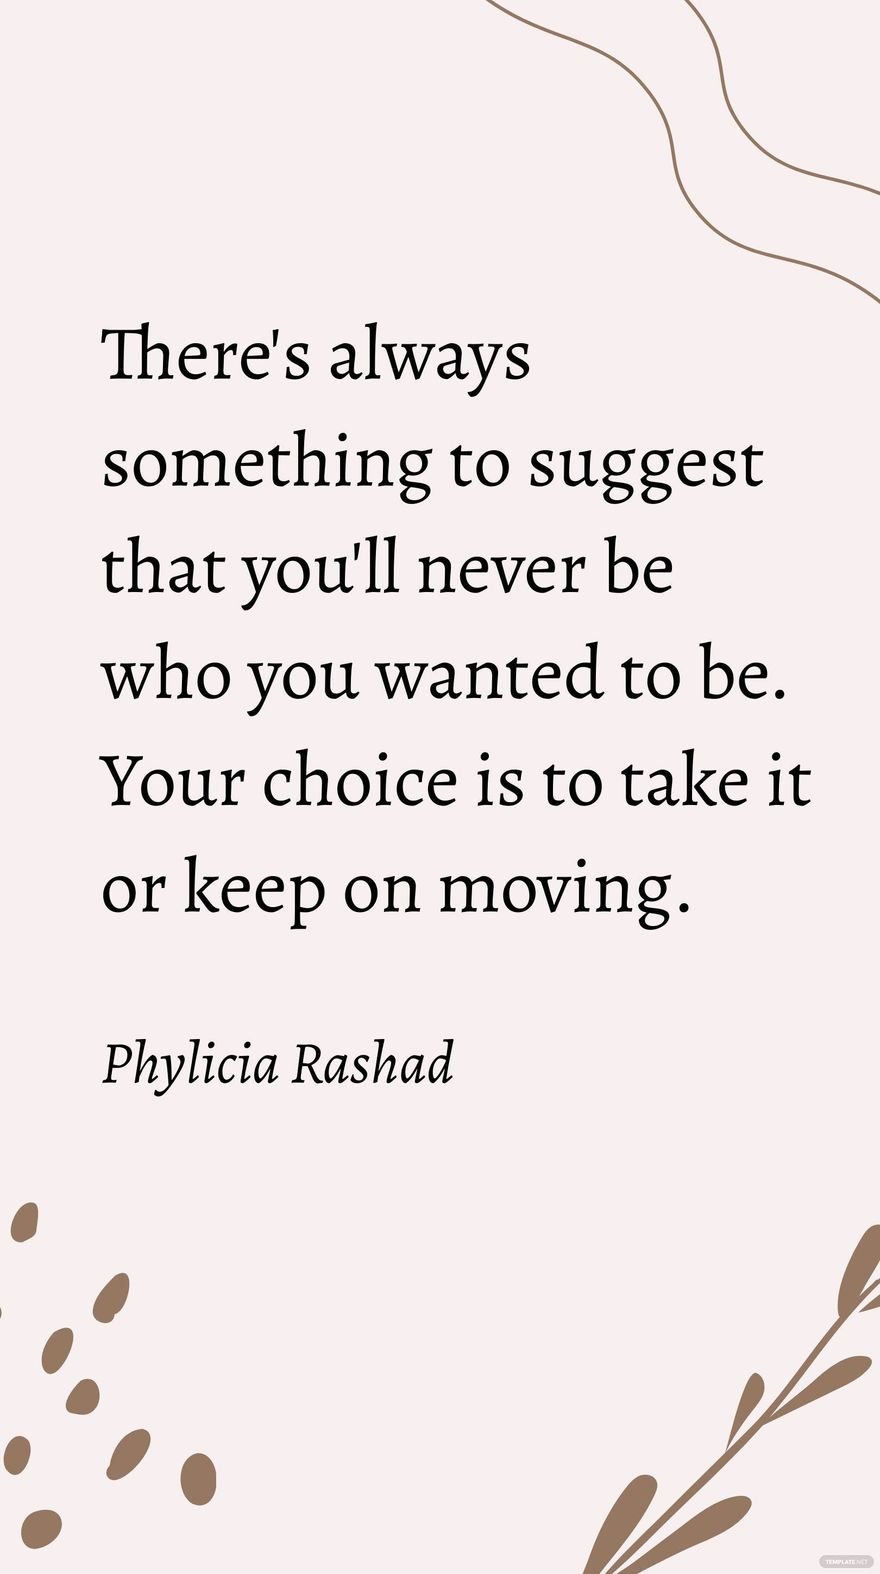 Free Phylicia Rashad - There's always something to suggest that you'll never be who you wanted to be. Your choice is to take it or keep on moving. in JPG